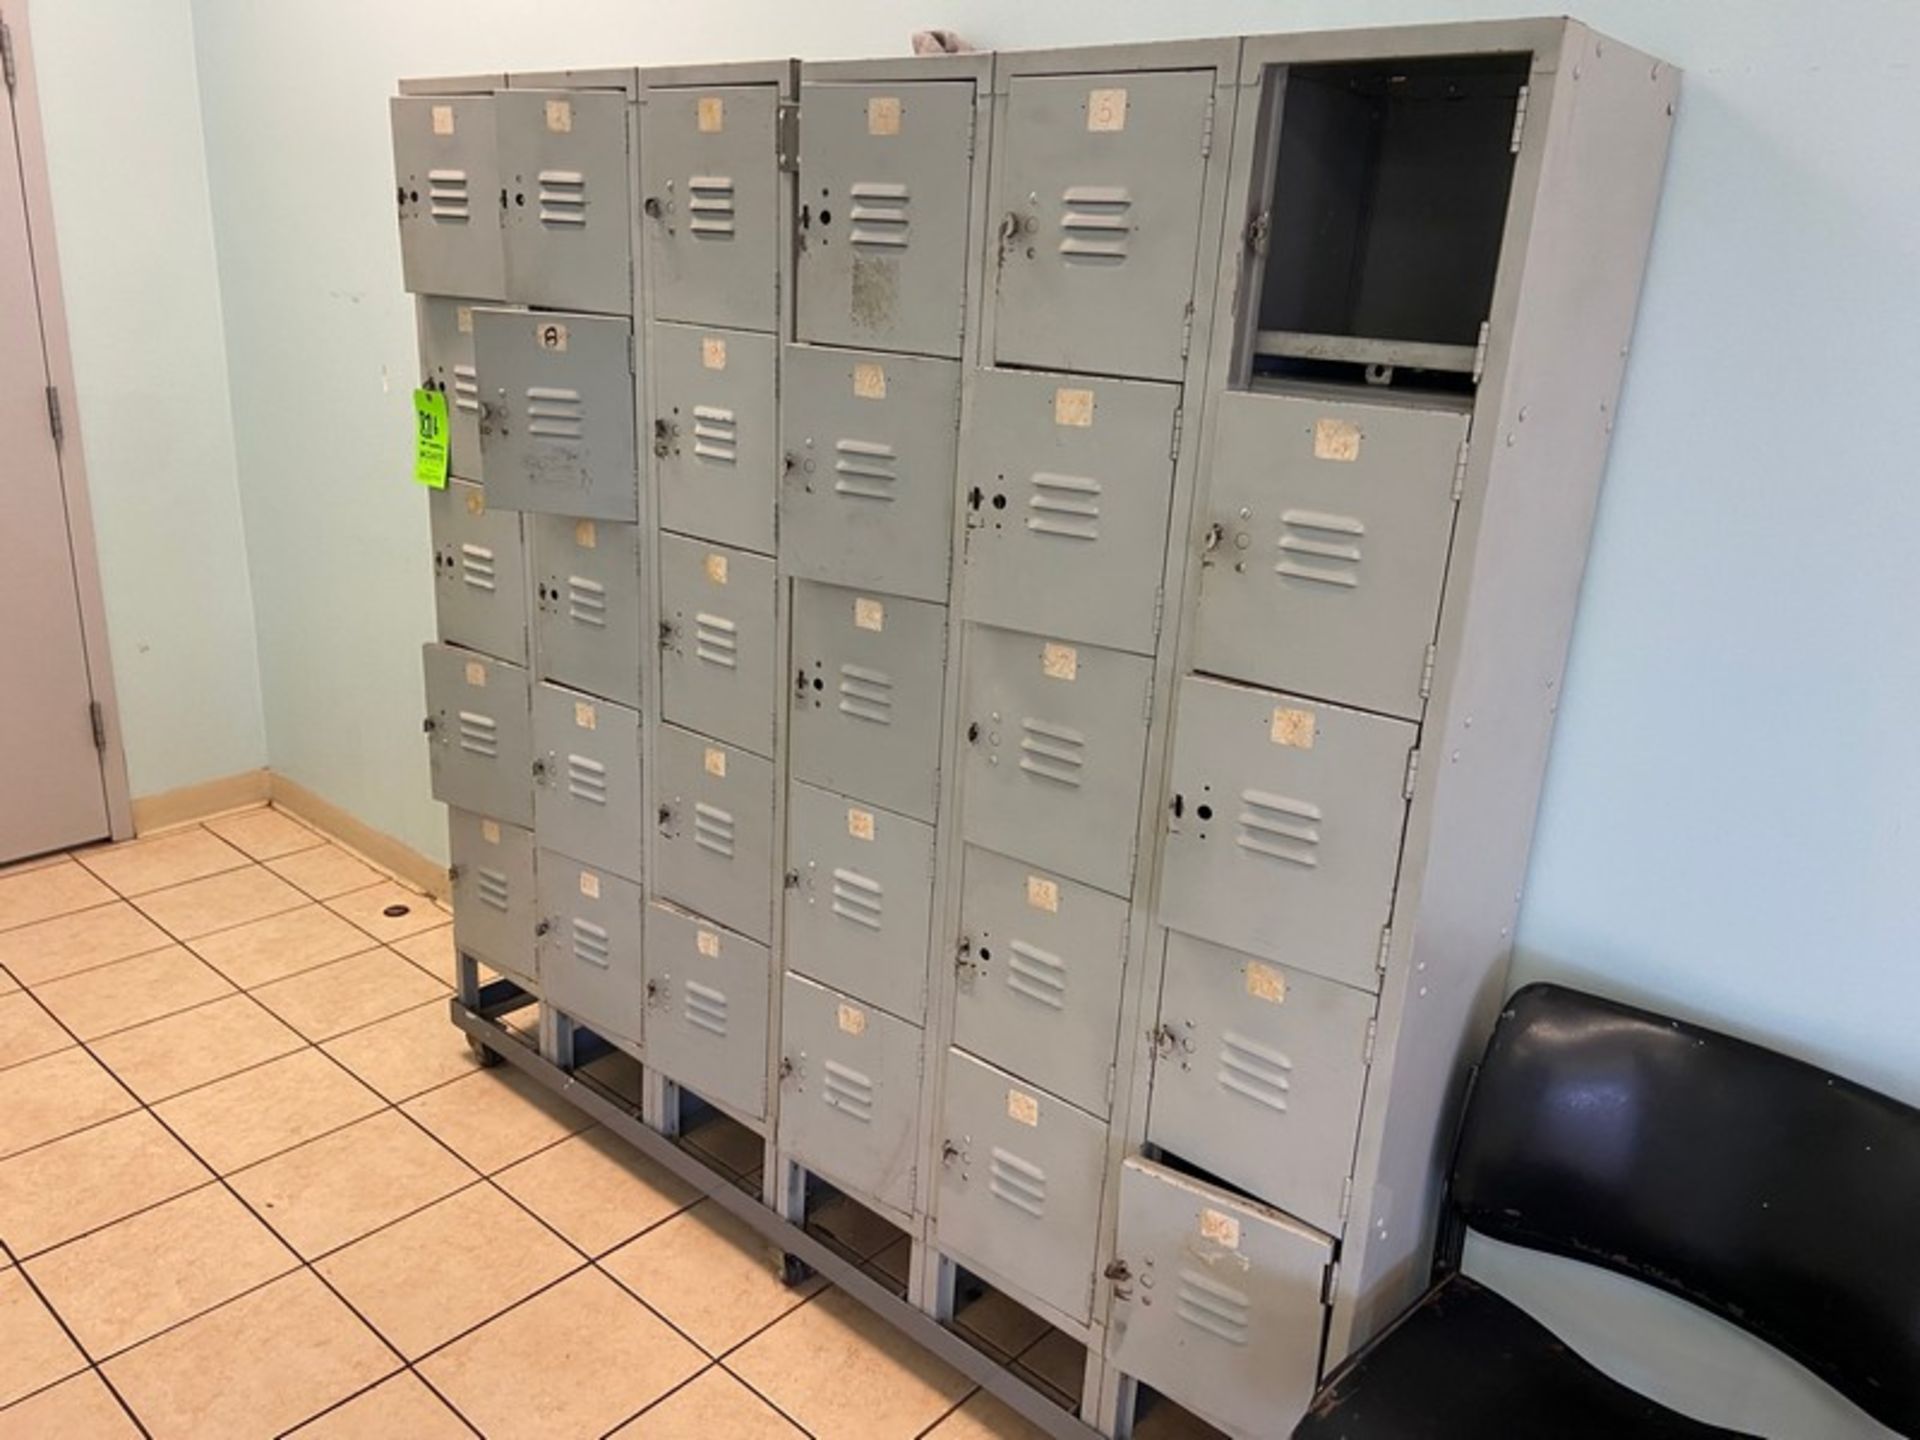 SECTION OF PERSONAL LOCKERS (LOCATED IN HERMITAGE, PA)